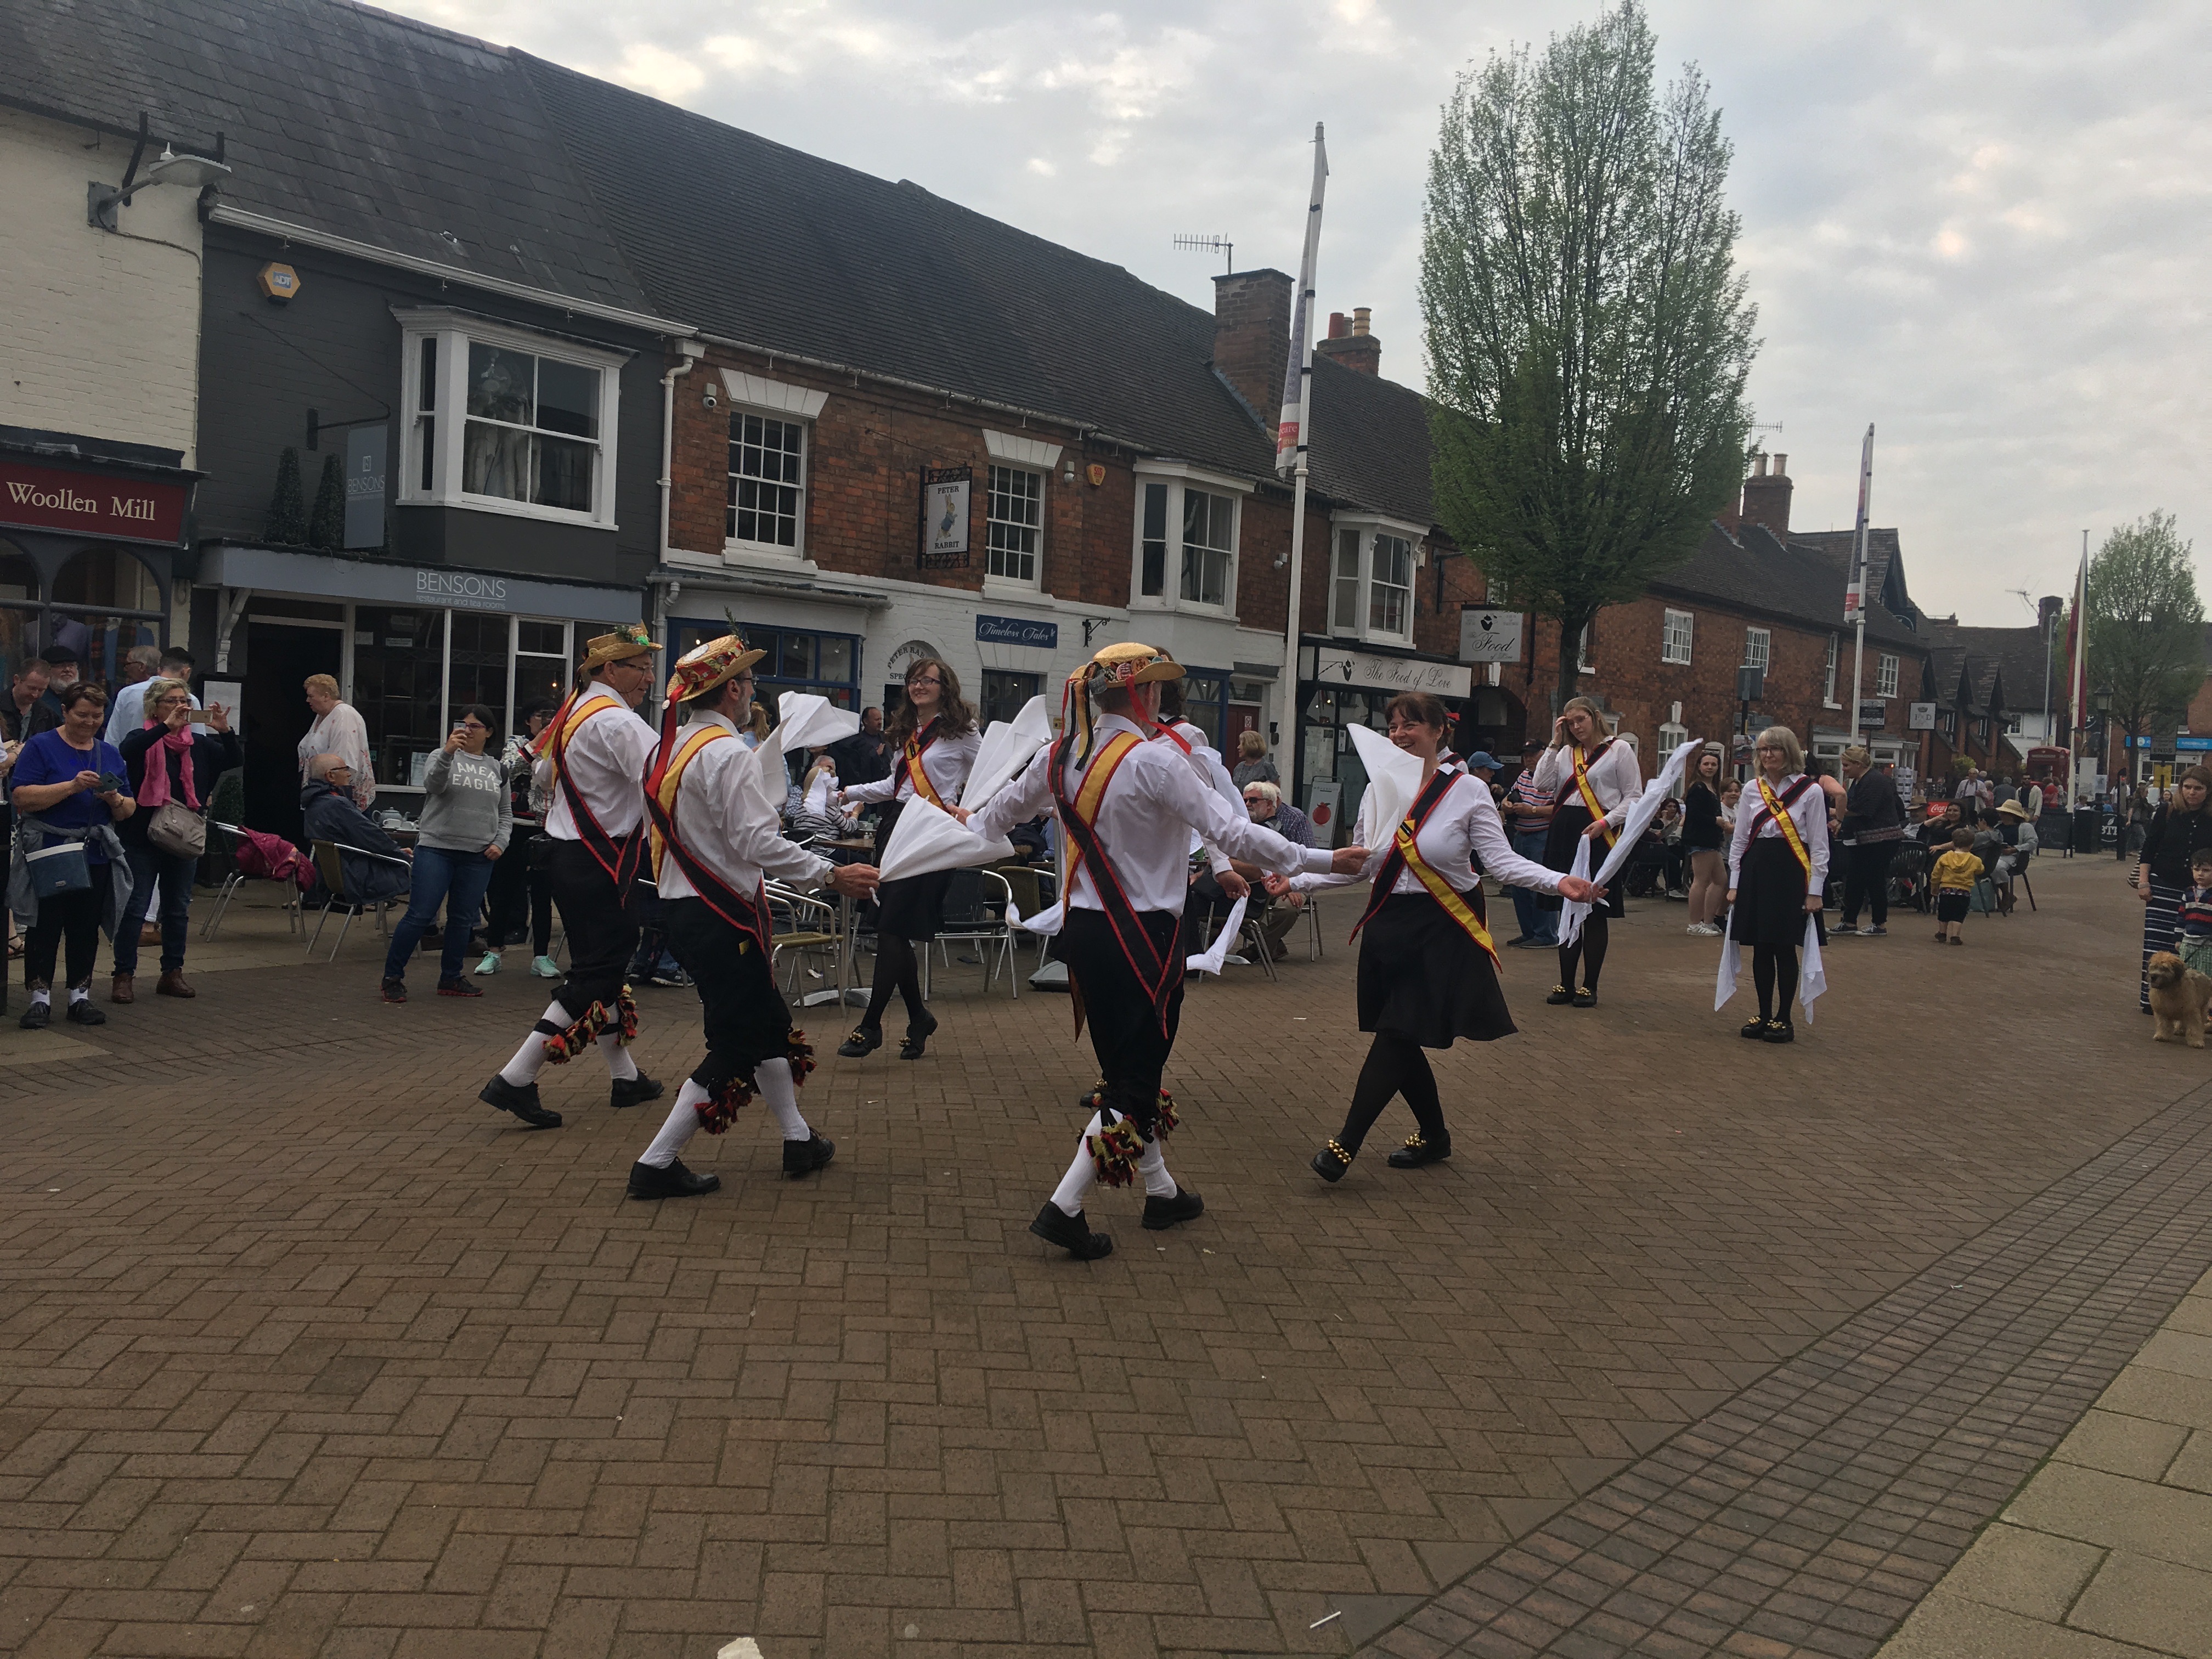 alt="Morris dancers dancing in two lines performing a traditional Renaissance dance on Shakespeare's birthday"